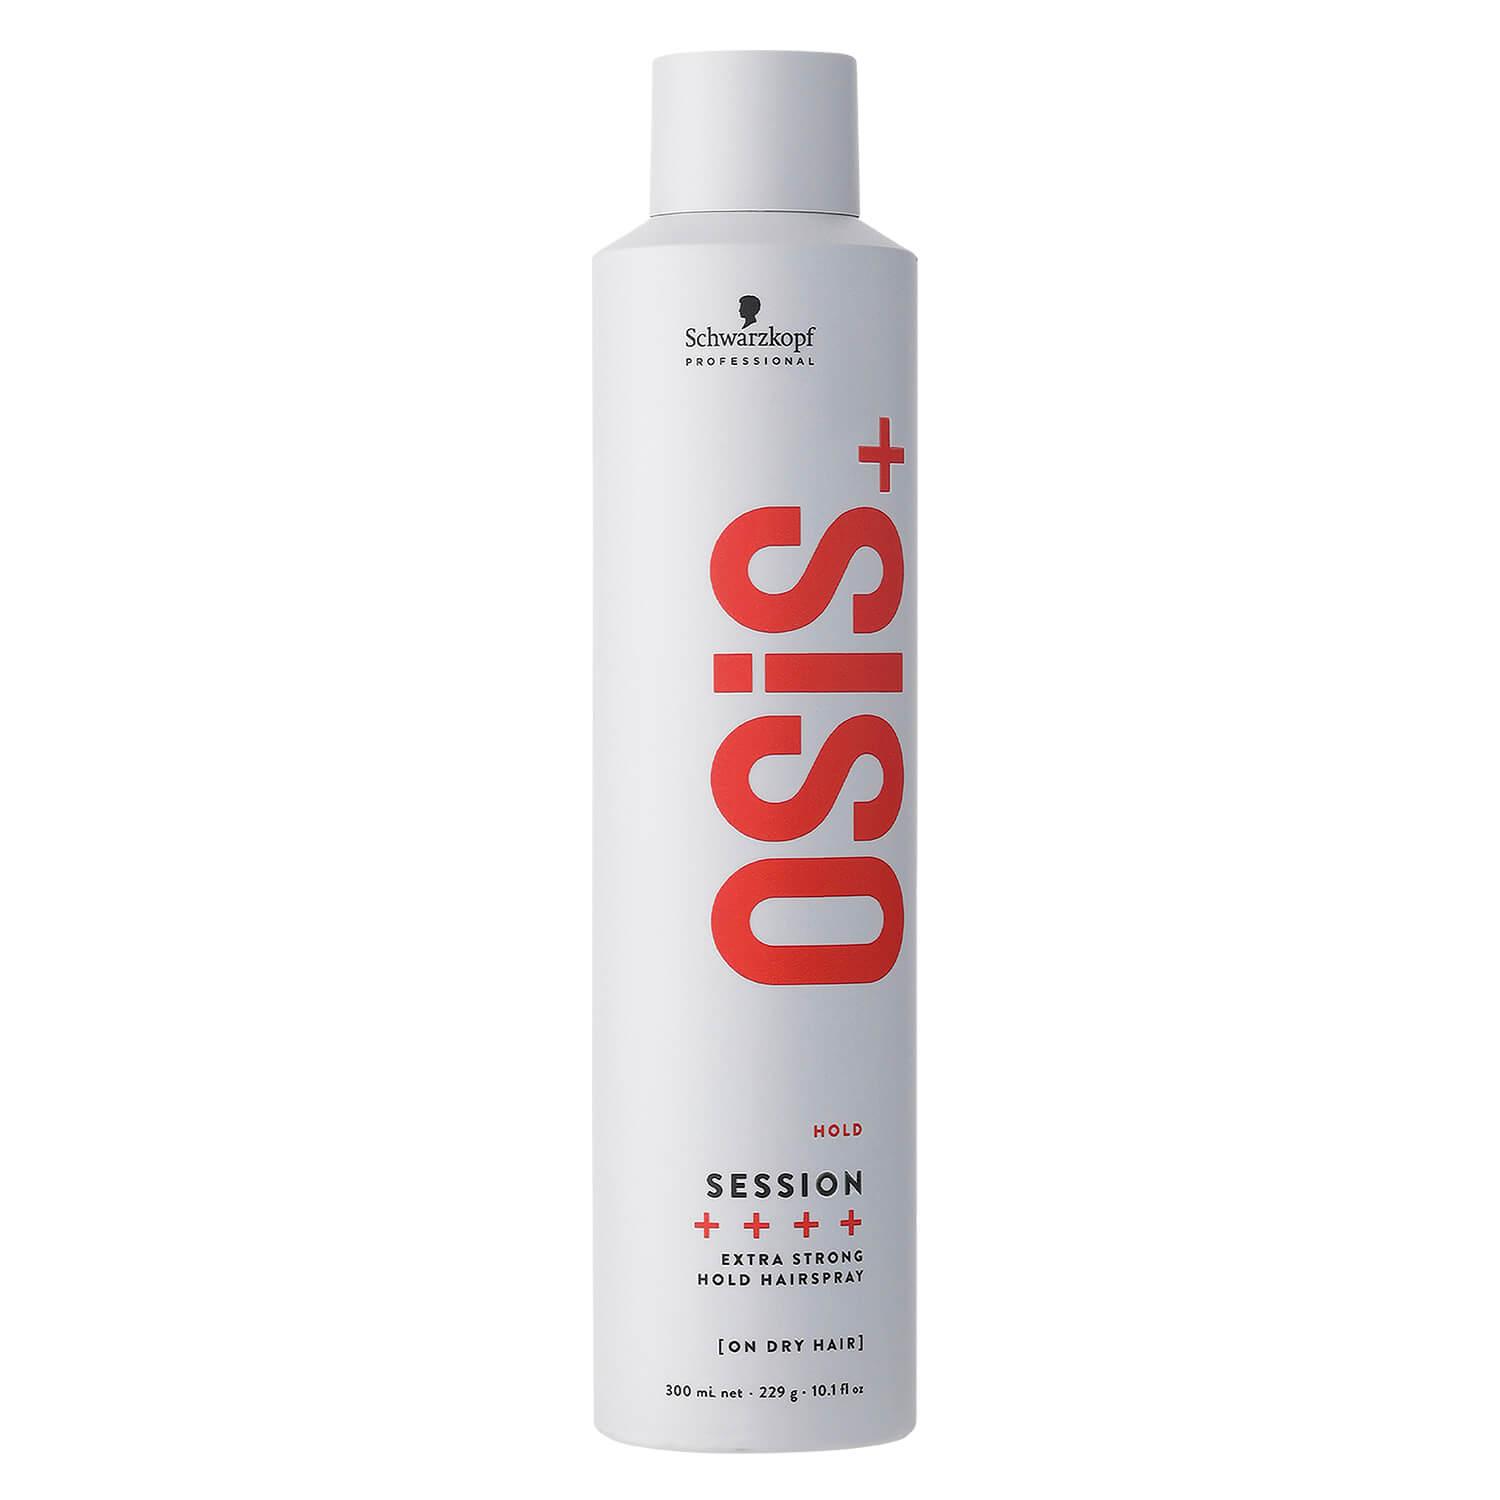 Osis - Session Extra Strong Hold Hairspray